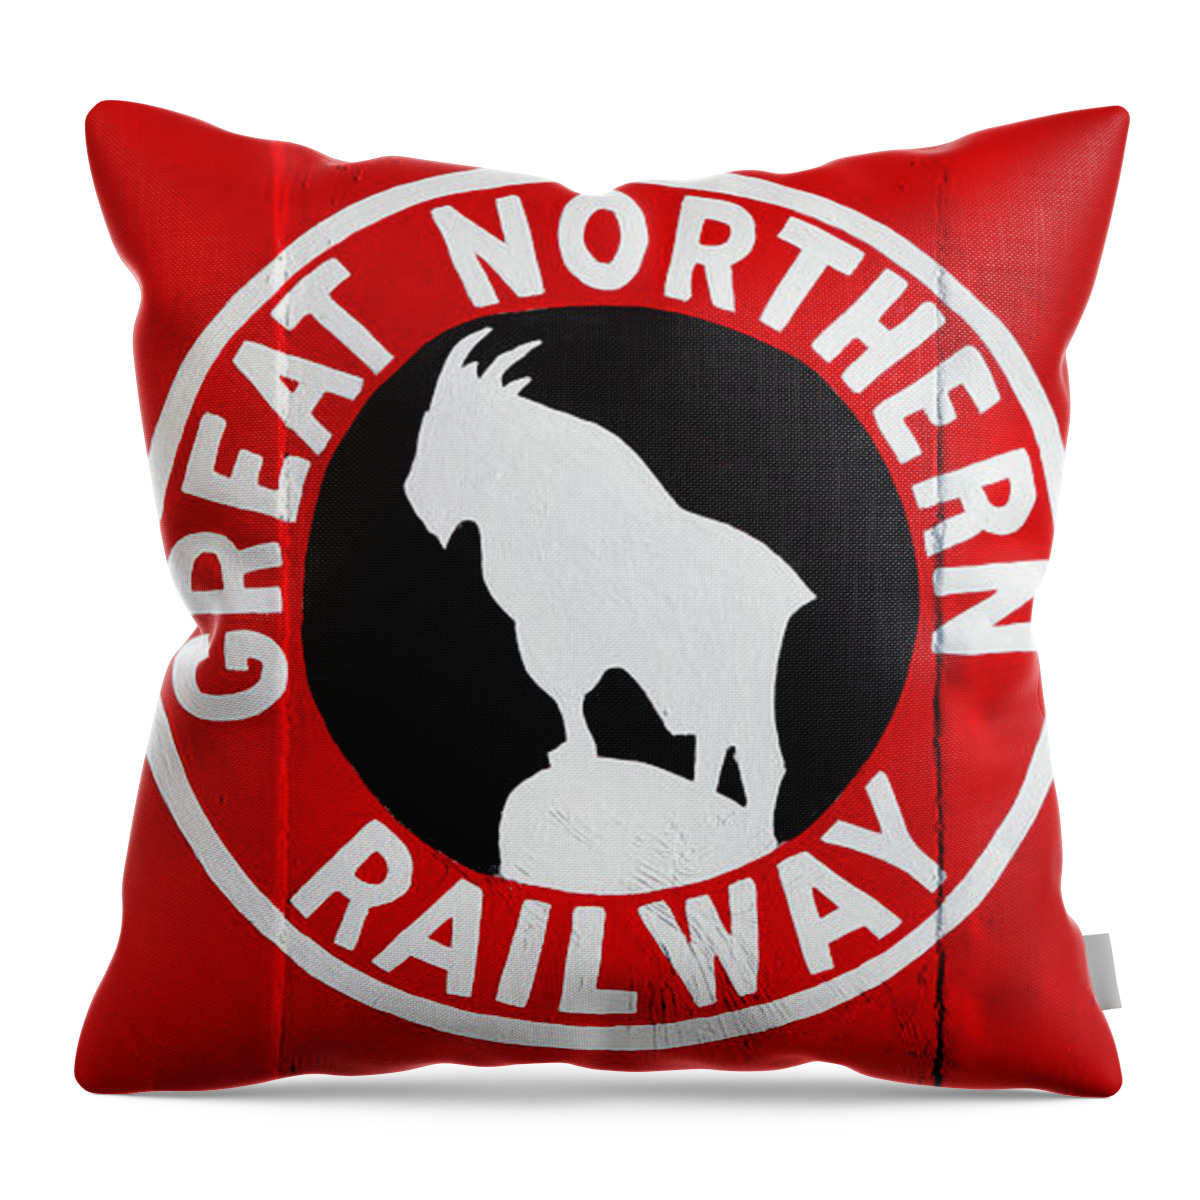 Caboose Throw Pillow featuring the photograph Great Northern Caboose by Todd Klassy